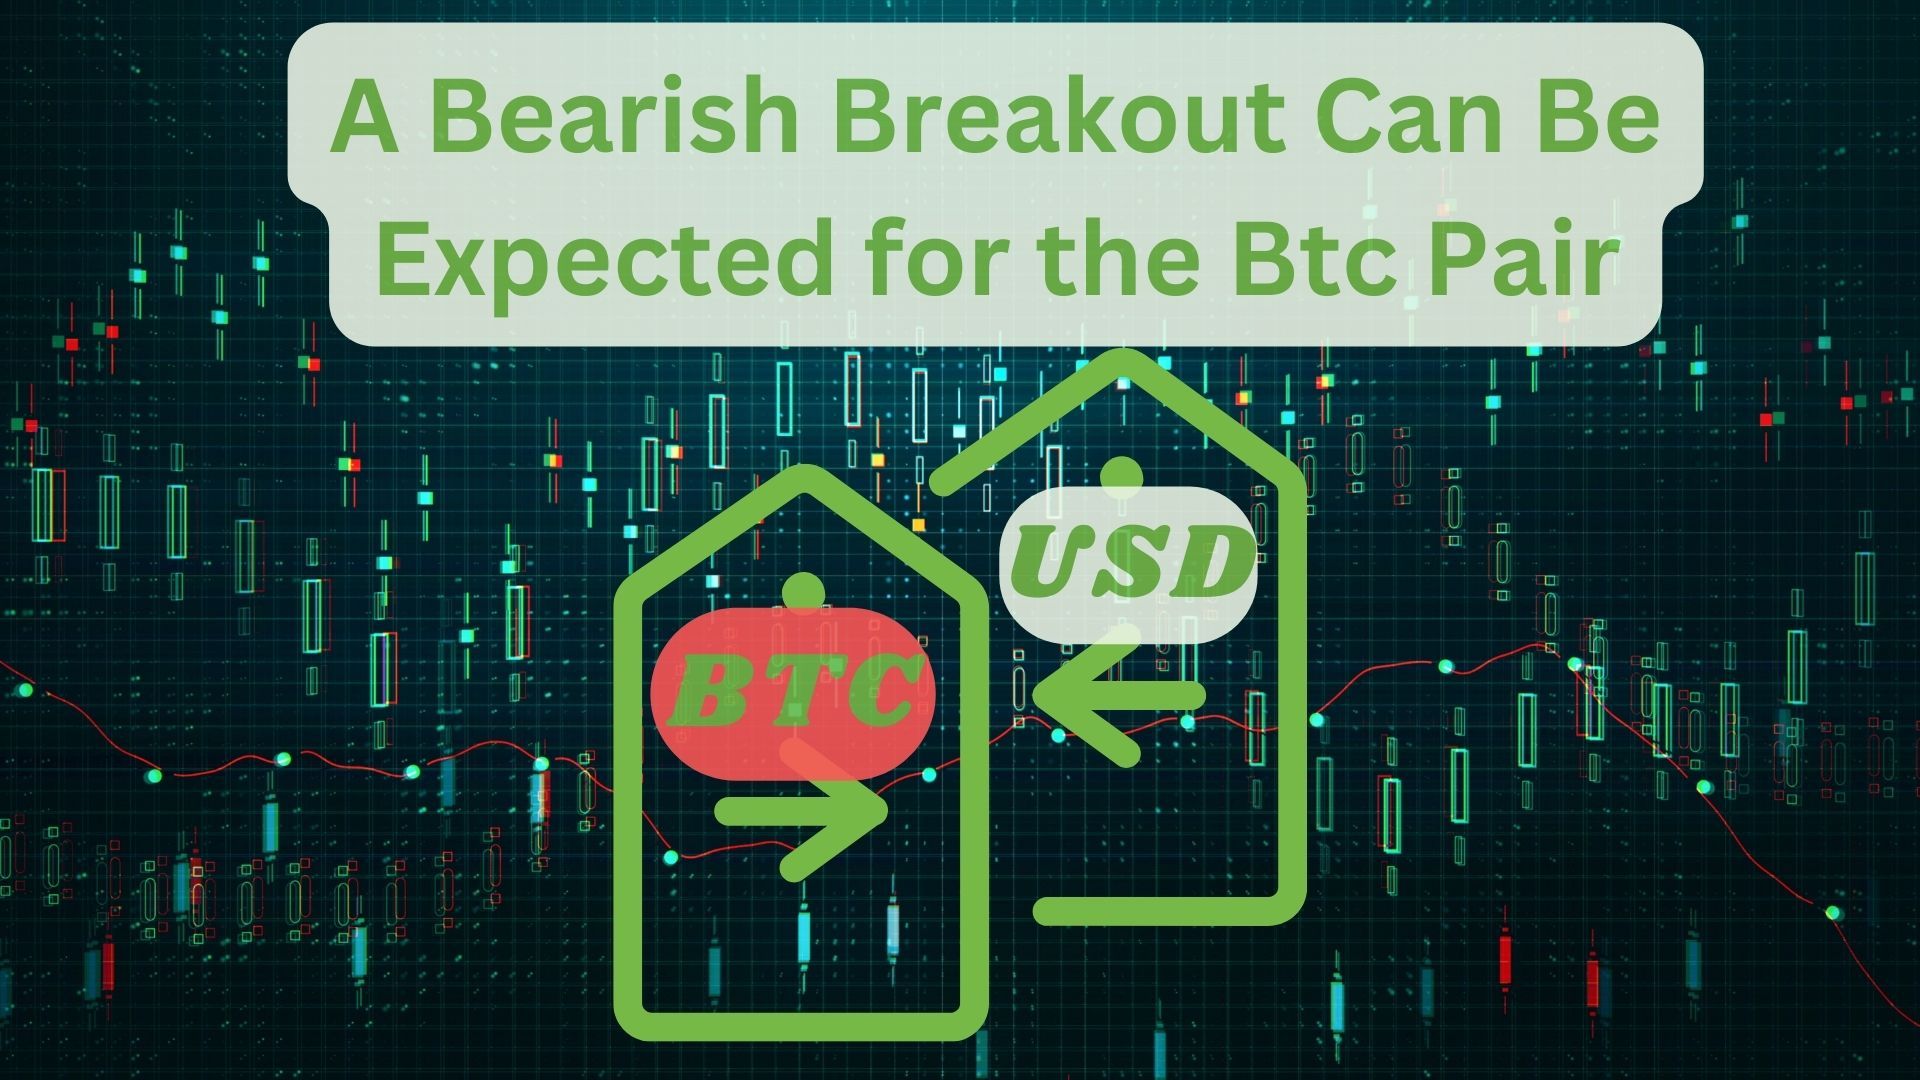 A Bearish Breakout Can Be Expected for the Btc Pair